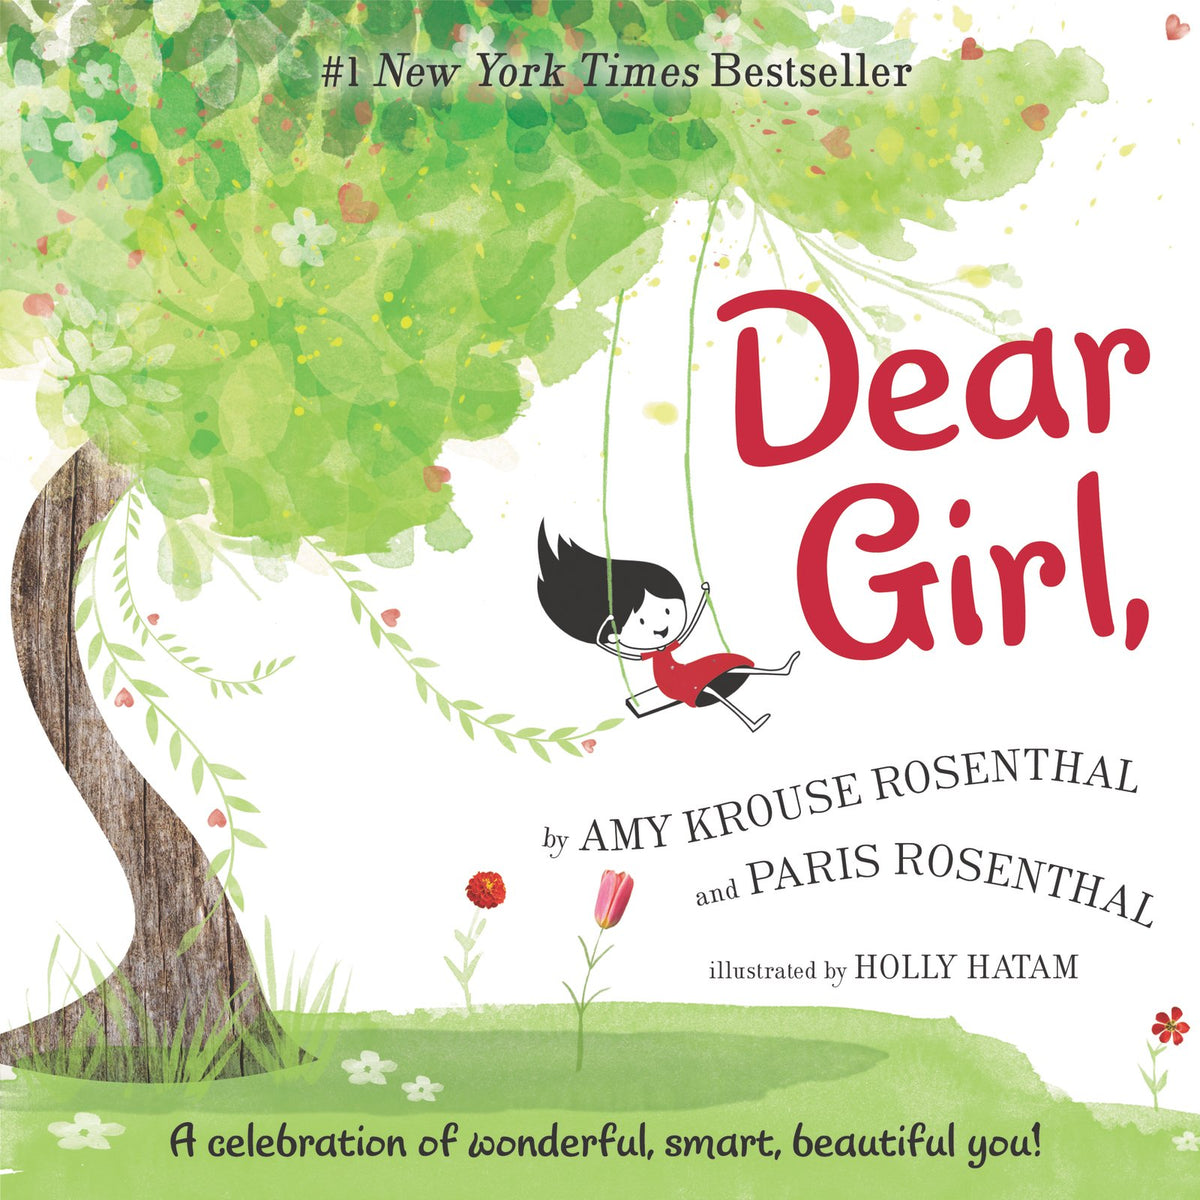 Dear Girl, by Amy Krouse Rosenthal and Paris Rosenthal